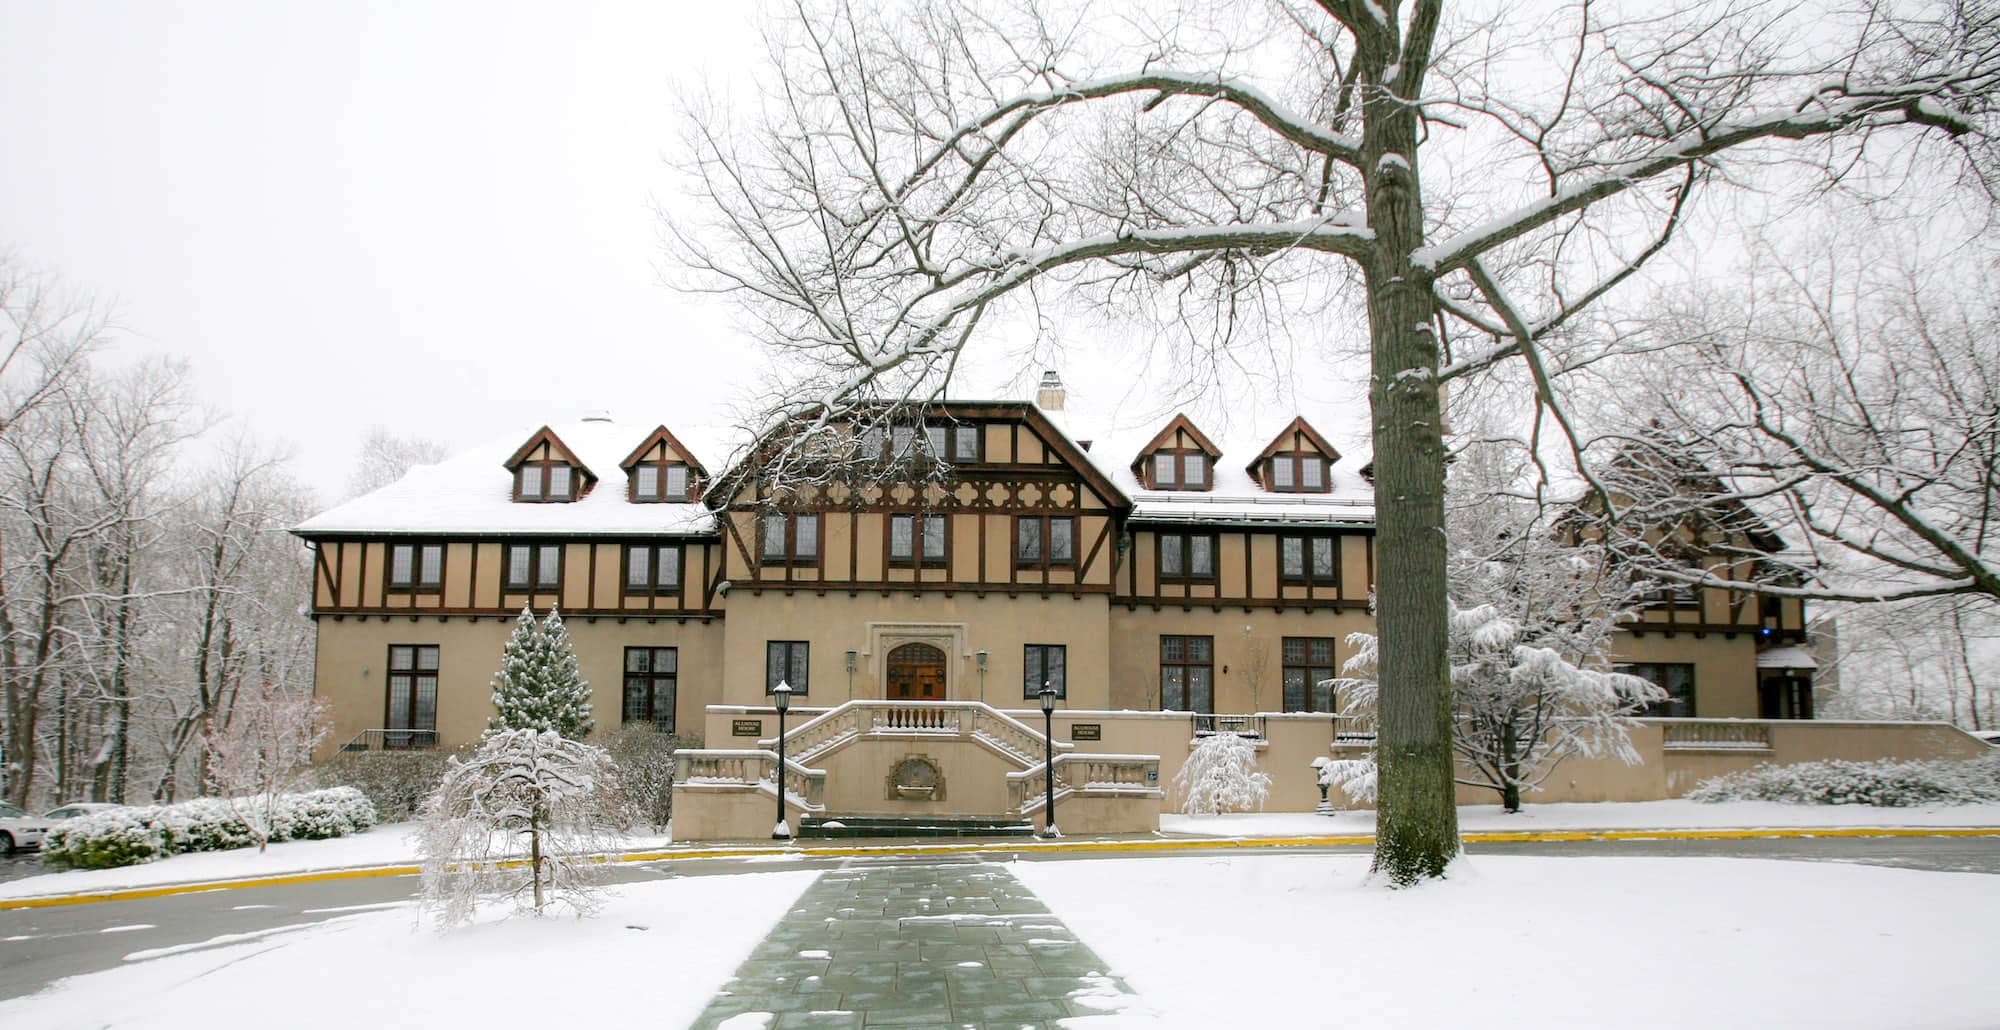 Exterior Front of the Alumnae House in the snow